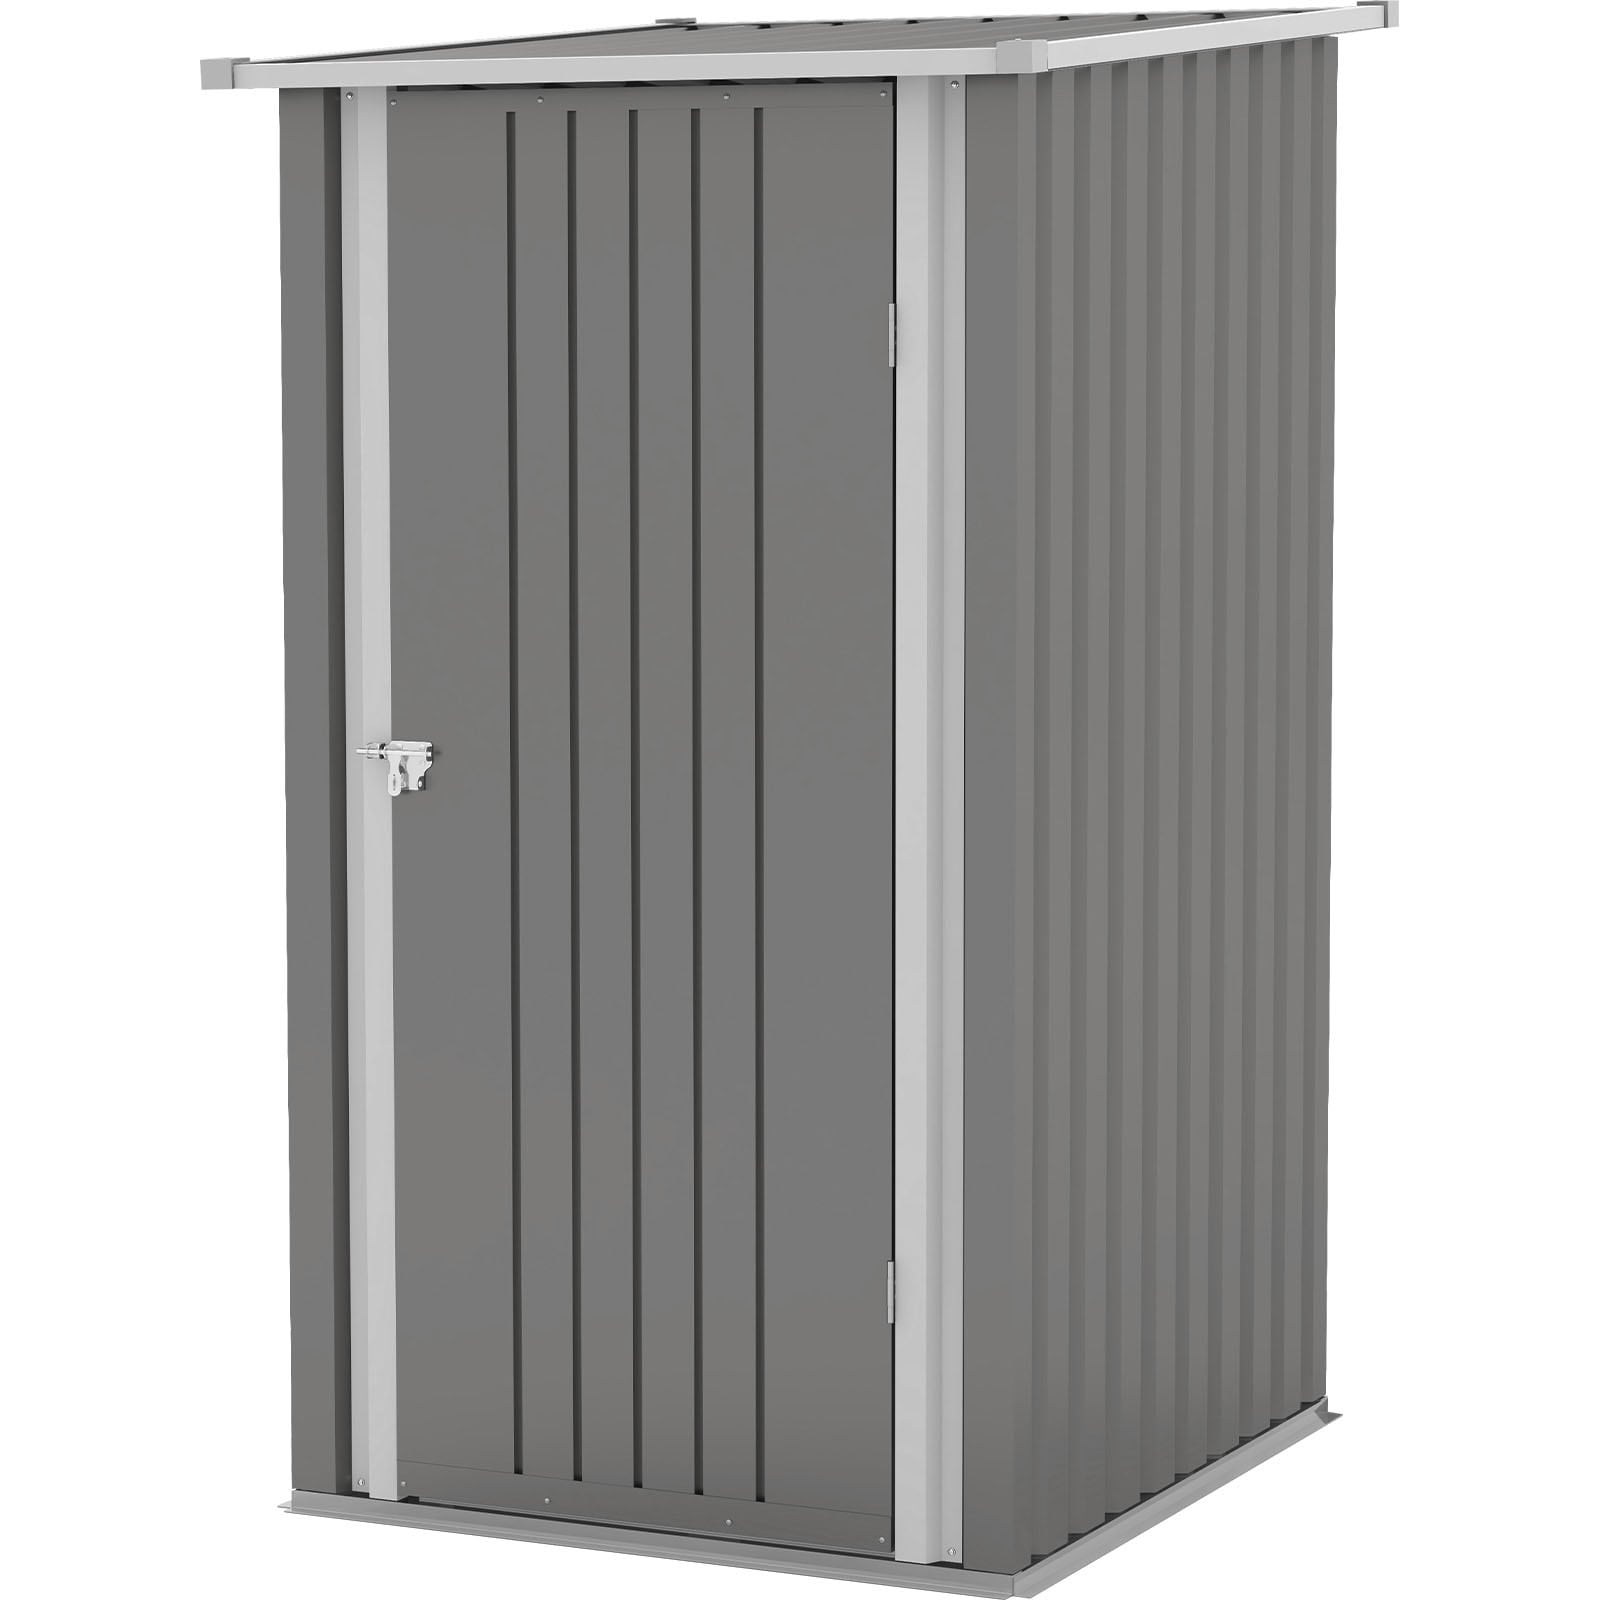 Patiowell 3-ft x 3-ft Galvanized Steel Storage Shed in Gray | WES-PS22-0110-GY